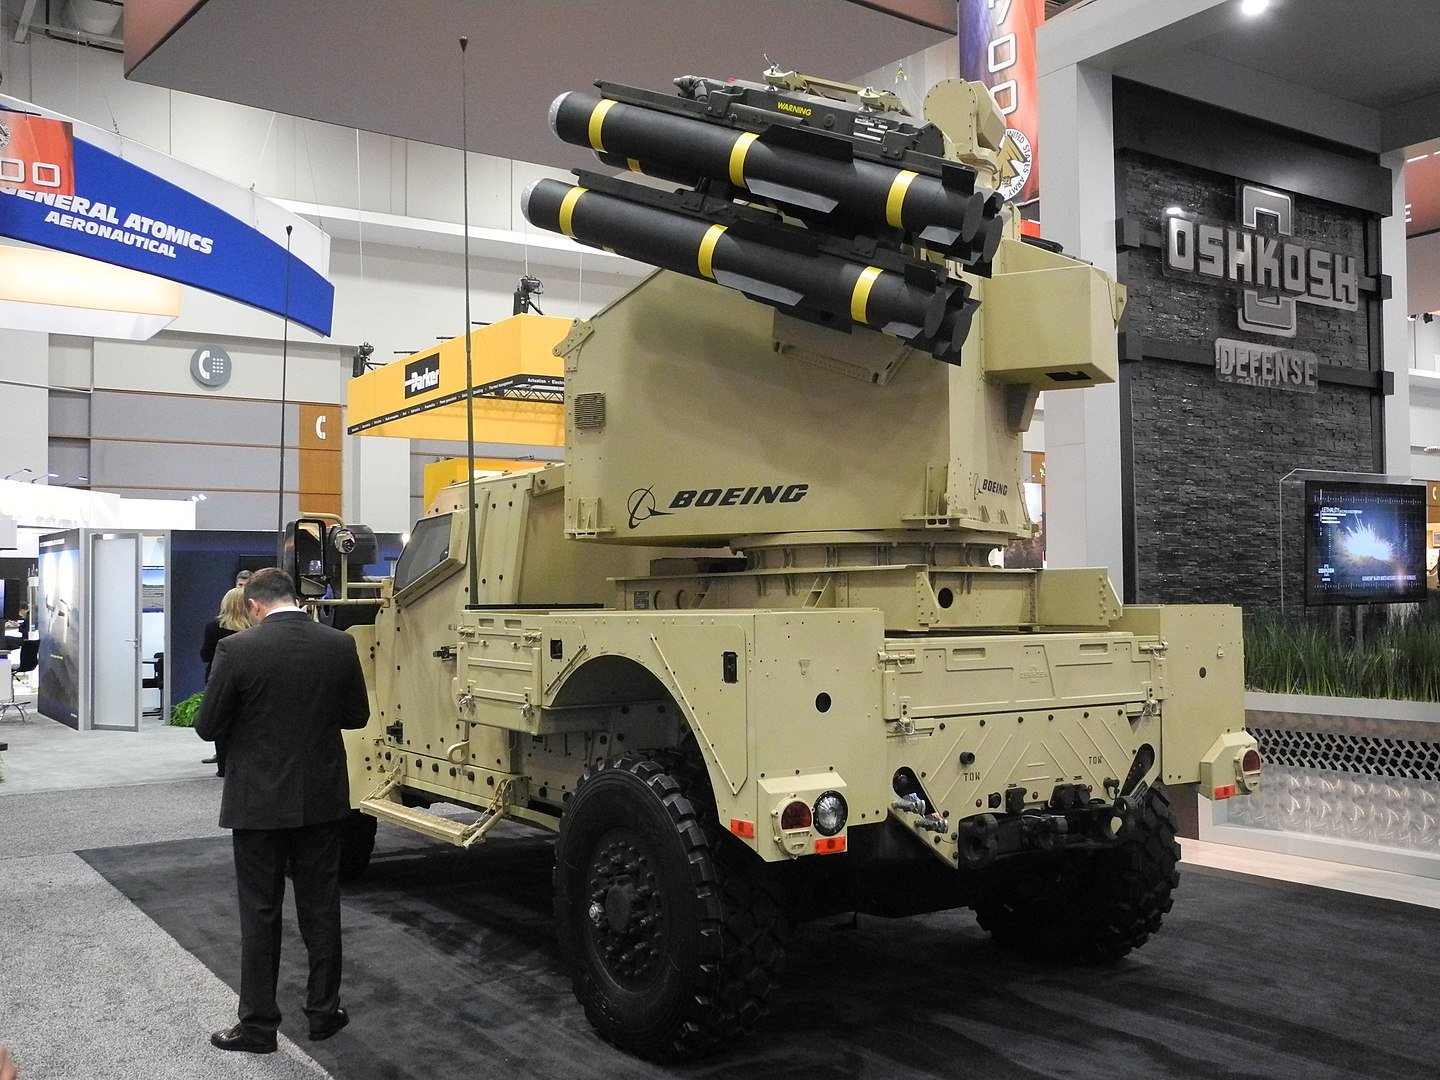 Can The U.S. Army's Latest Air Defense System Handle 21st Century